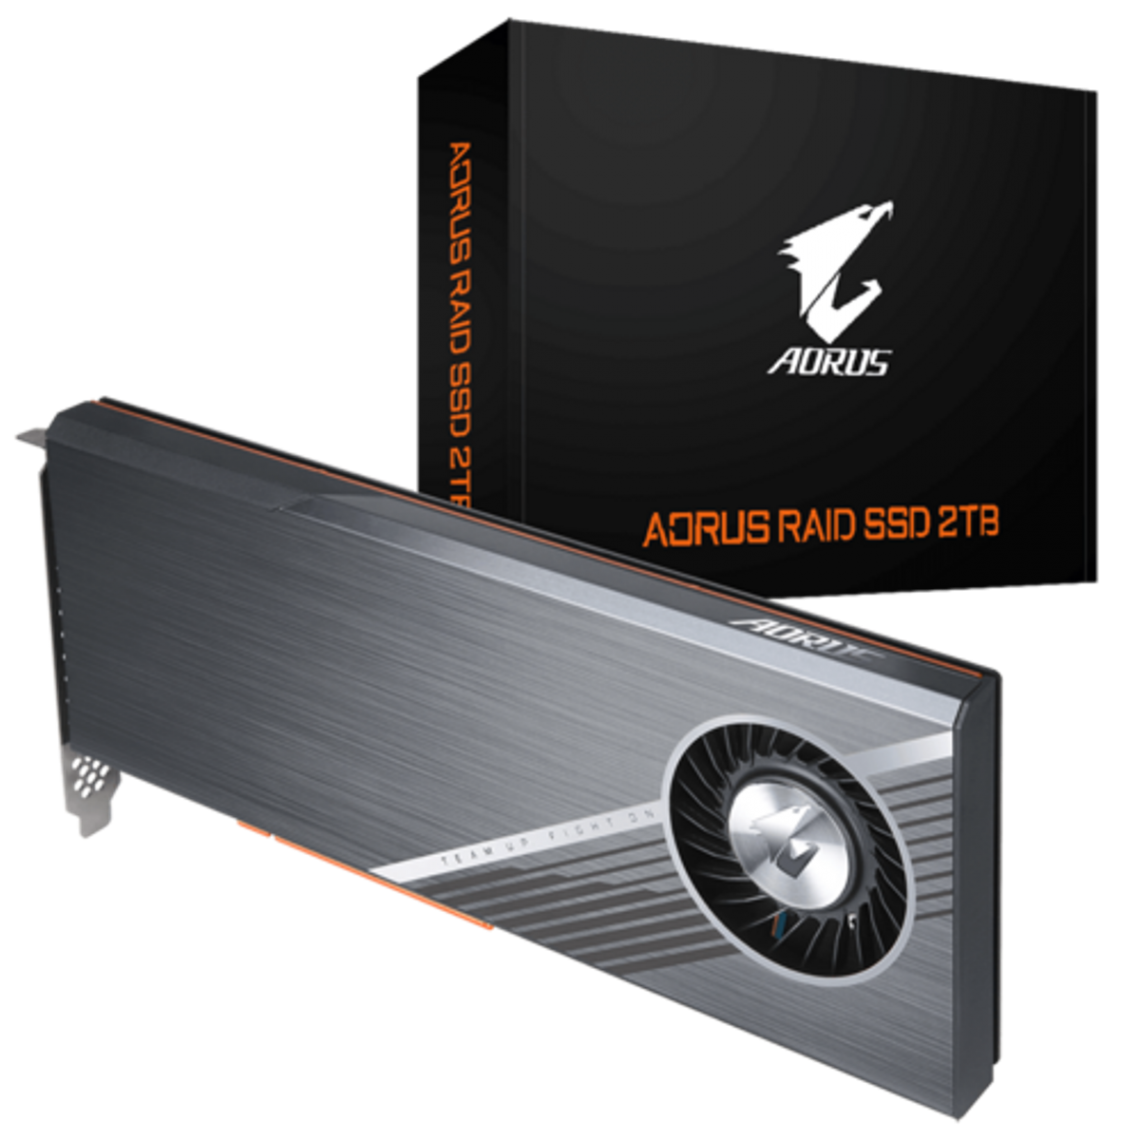 Gigabyte - Aorus Raid SSD 2 To - PCI Express 3.0 8x - NVMe 1.3 - Lecture sequentielle : 6300 Mo/s - Ecriture sequentielle : 6000 Mo/s - SSD Interne